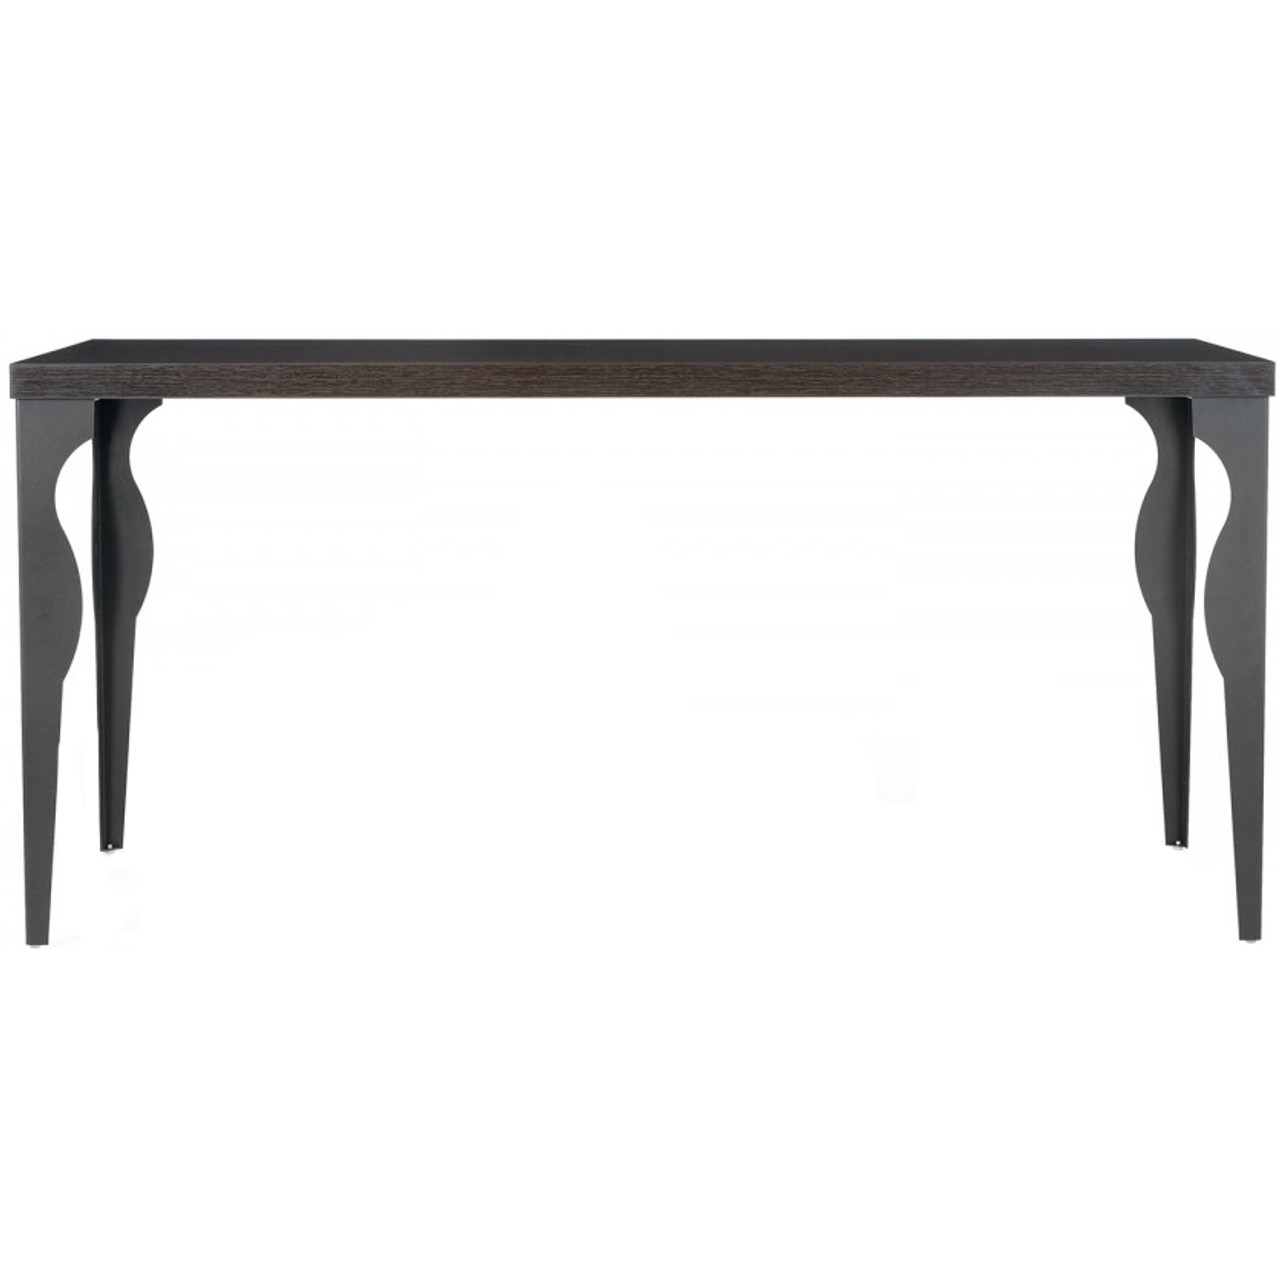 Modern Black Wood W Steel Legs Dining Table 63 2xhome Modern And Contemporary Furniture